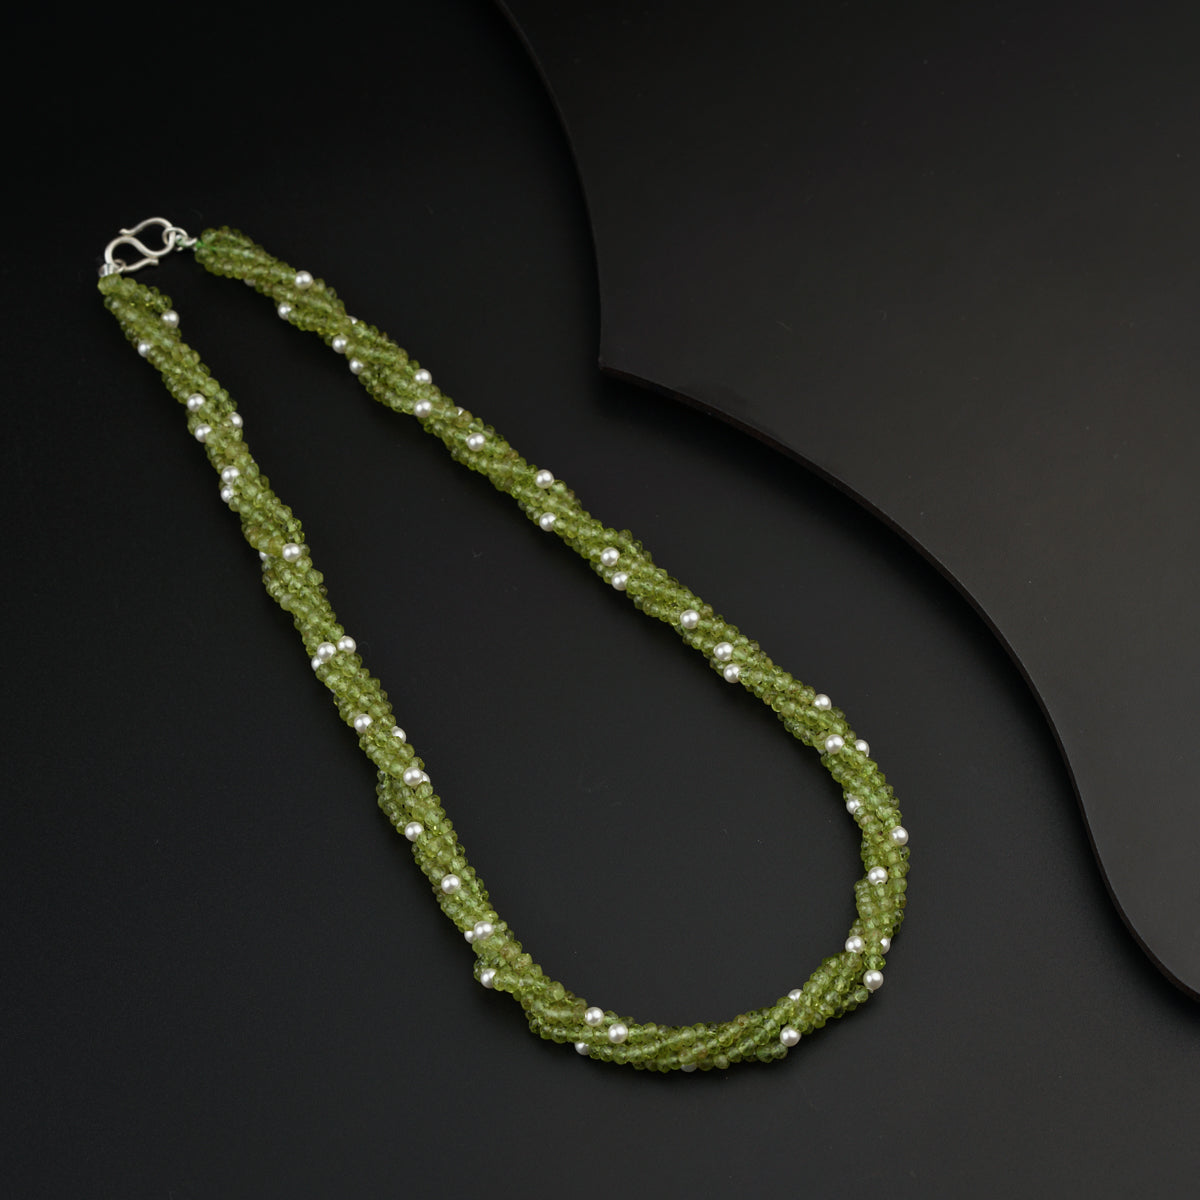 a green beaded necklace on a black surface